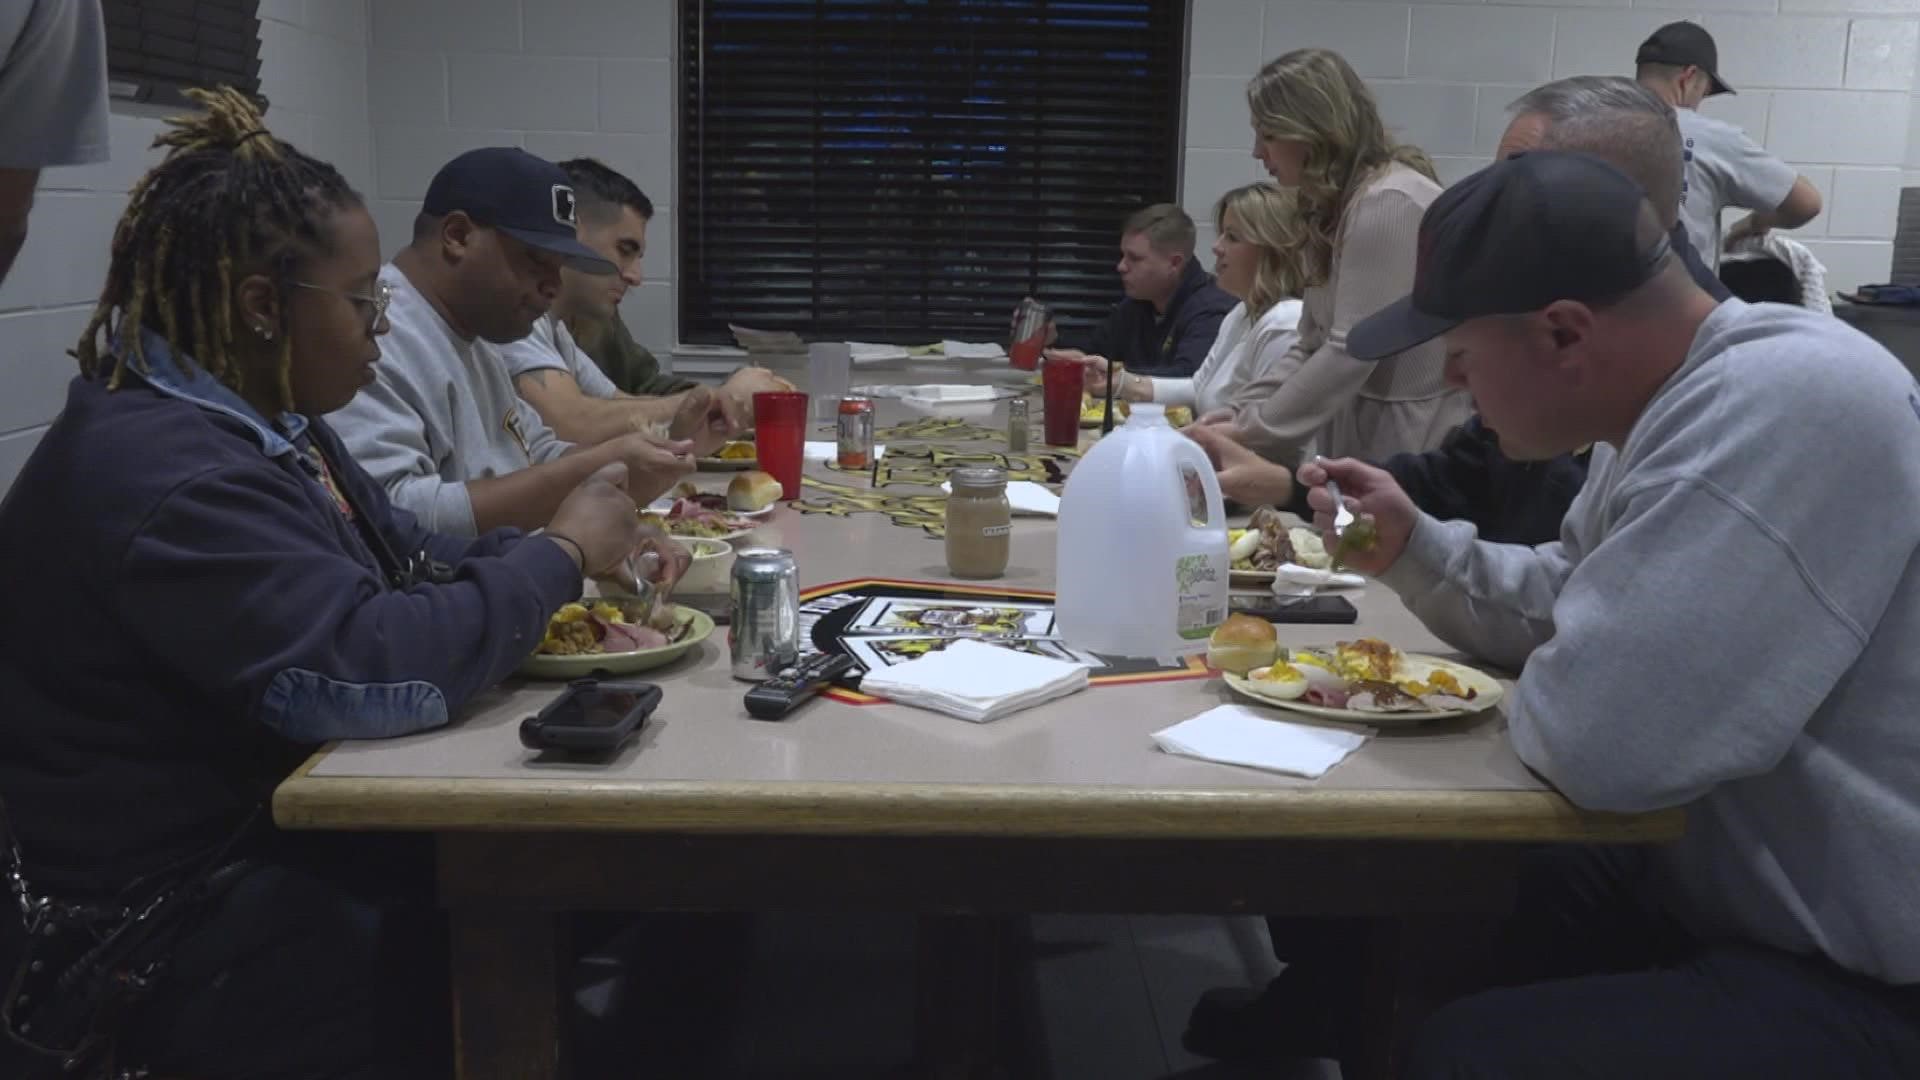 First responders who serve on holidays found a moment to give thanks.